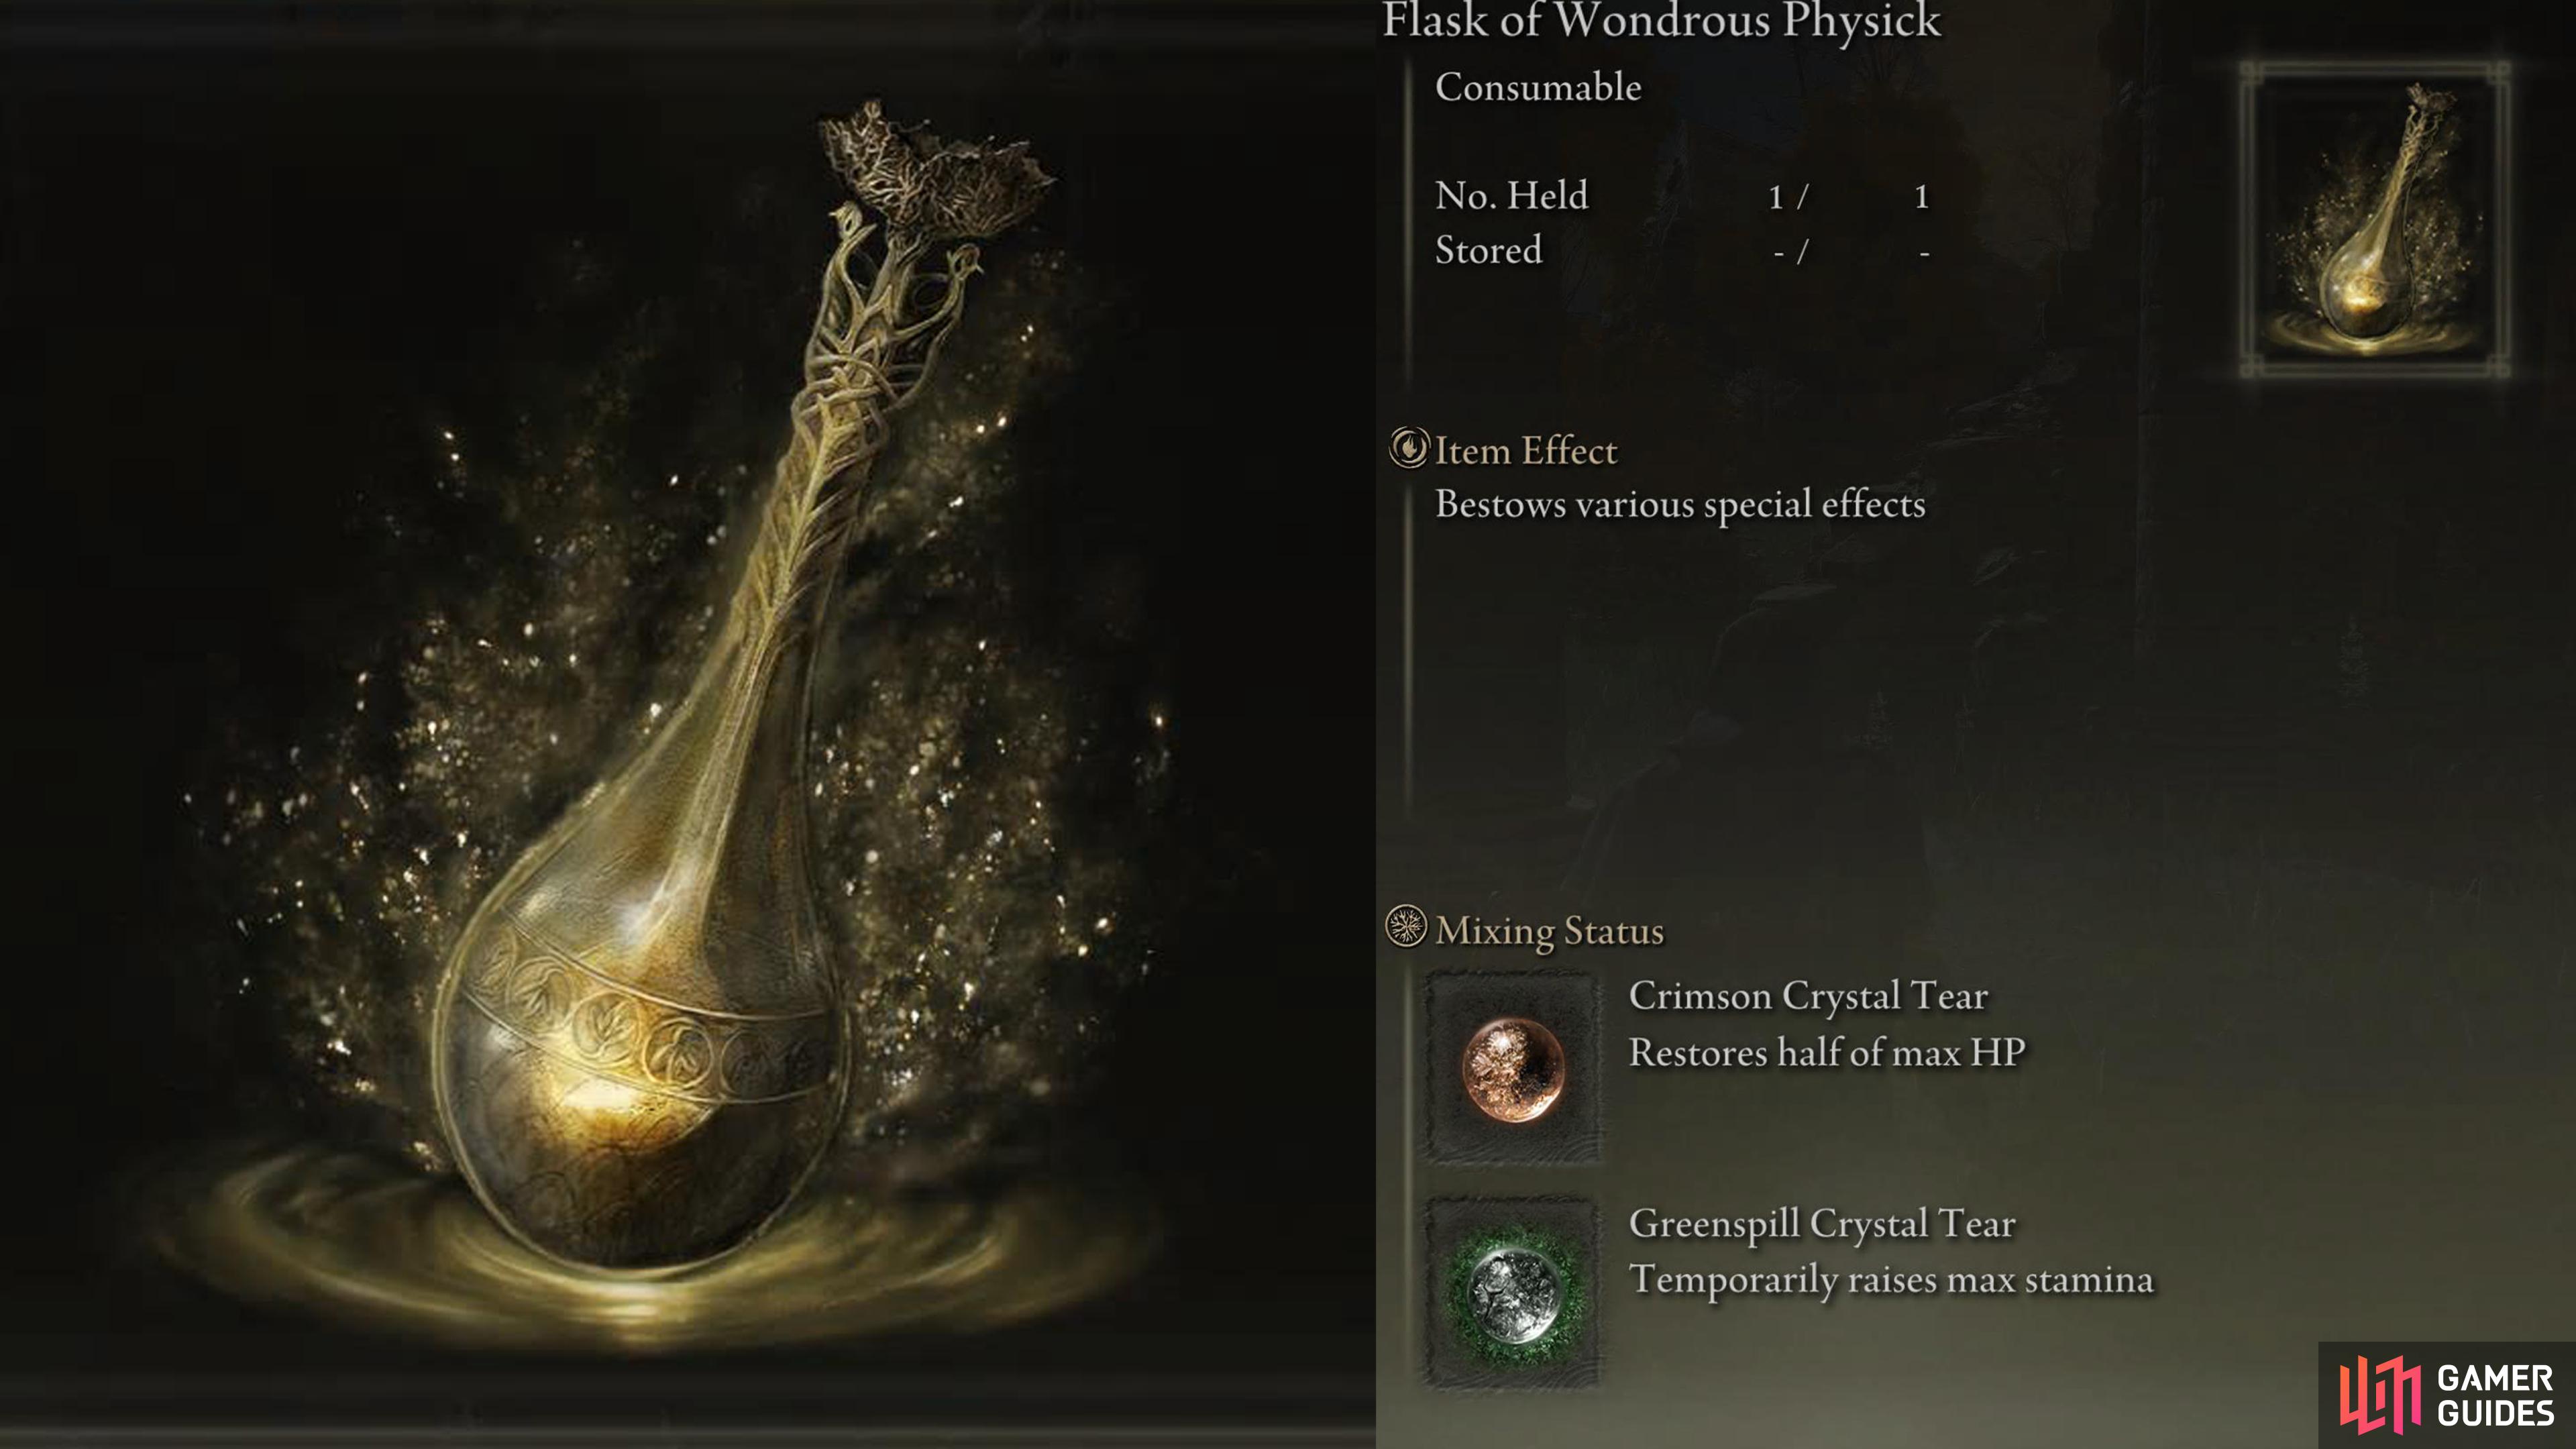 You can add to Tears to the Flask of Wondrous Physick. This’ll give you all kinds of various effects.